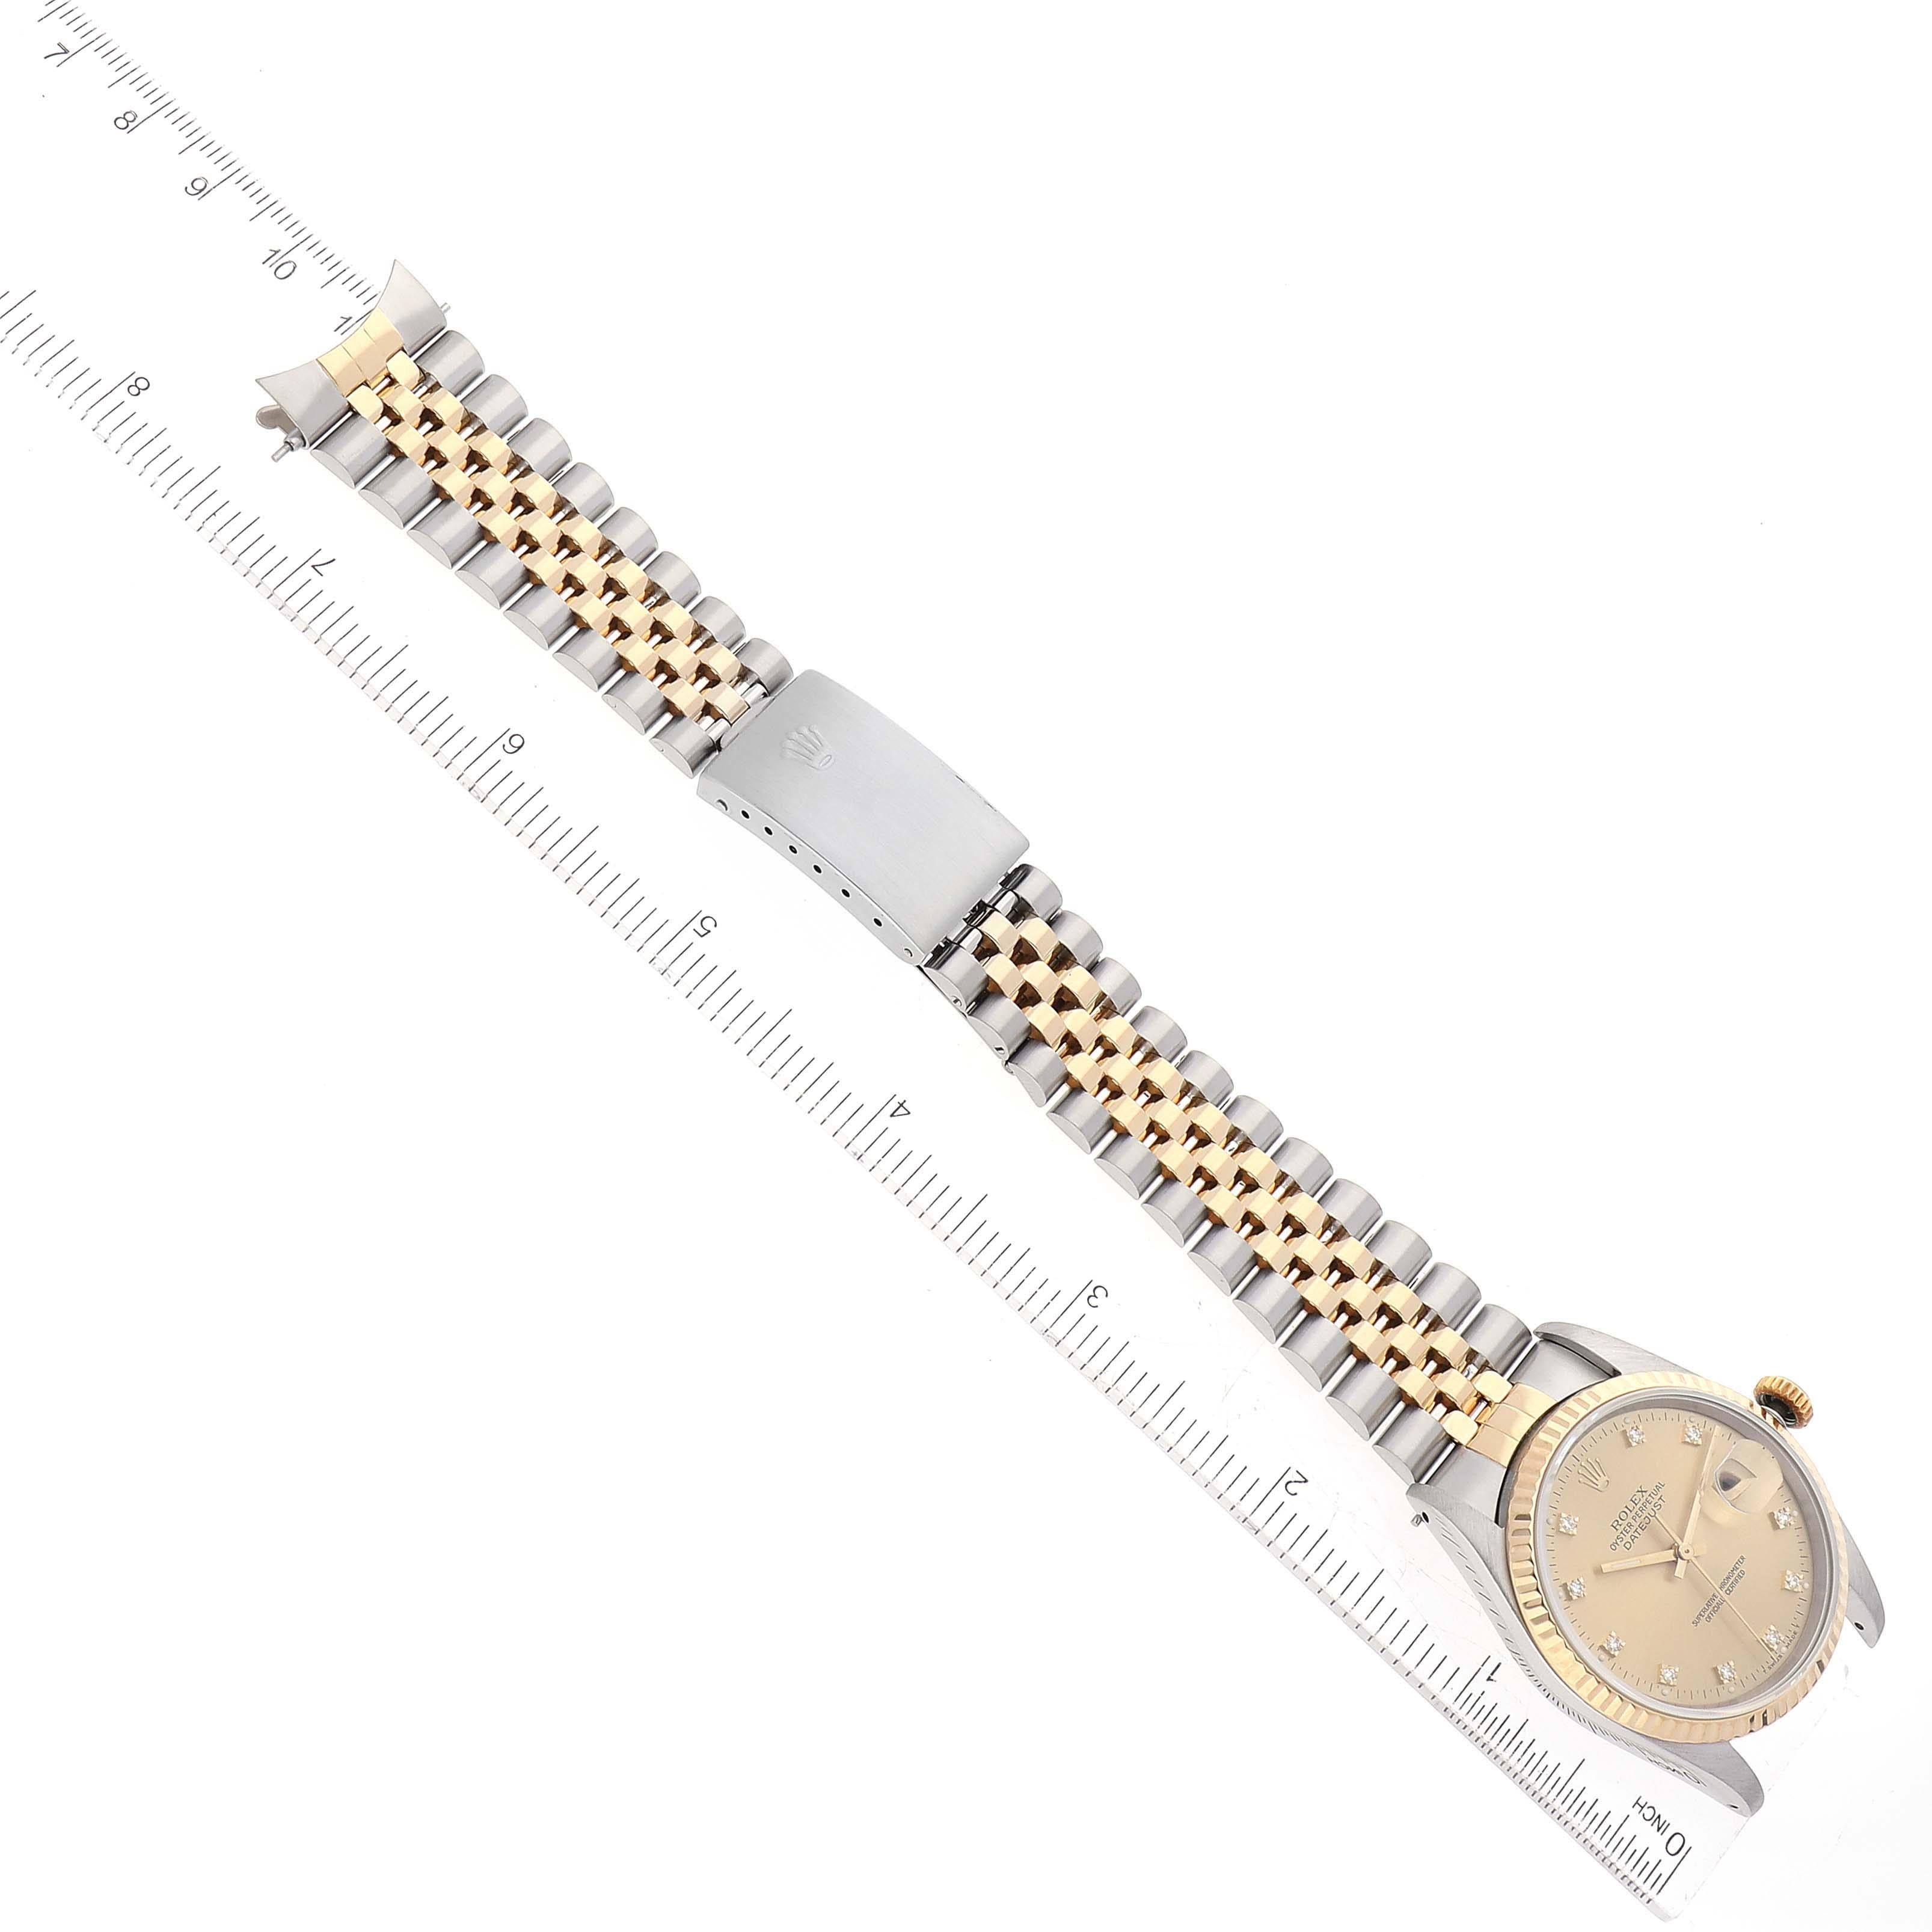 Rolex Datejust Diamond Dial Steel Yellow Gold Mens Watch 16233 For Sale 7